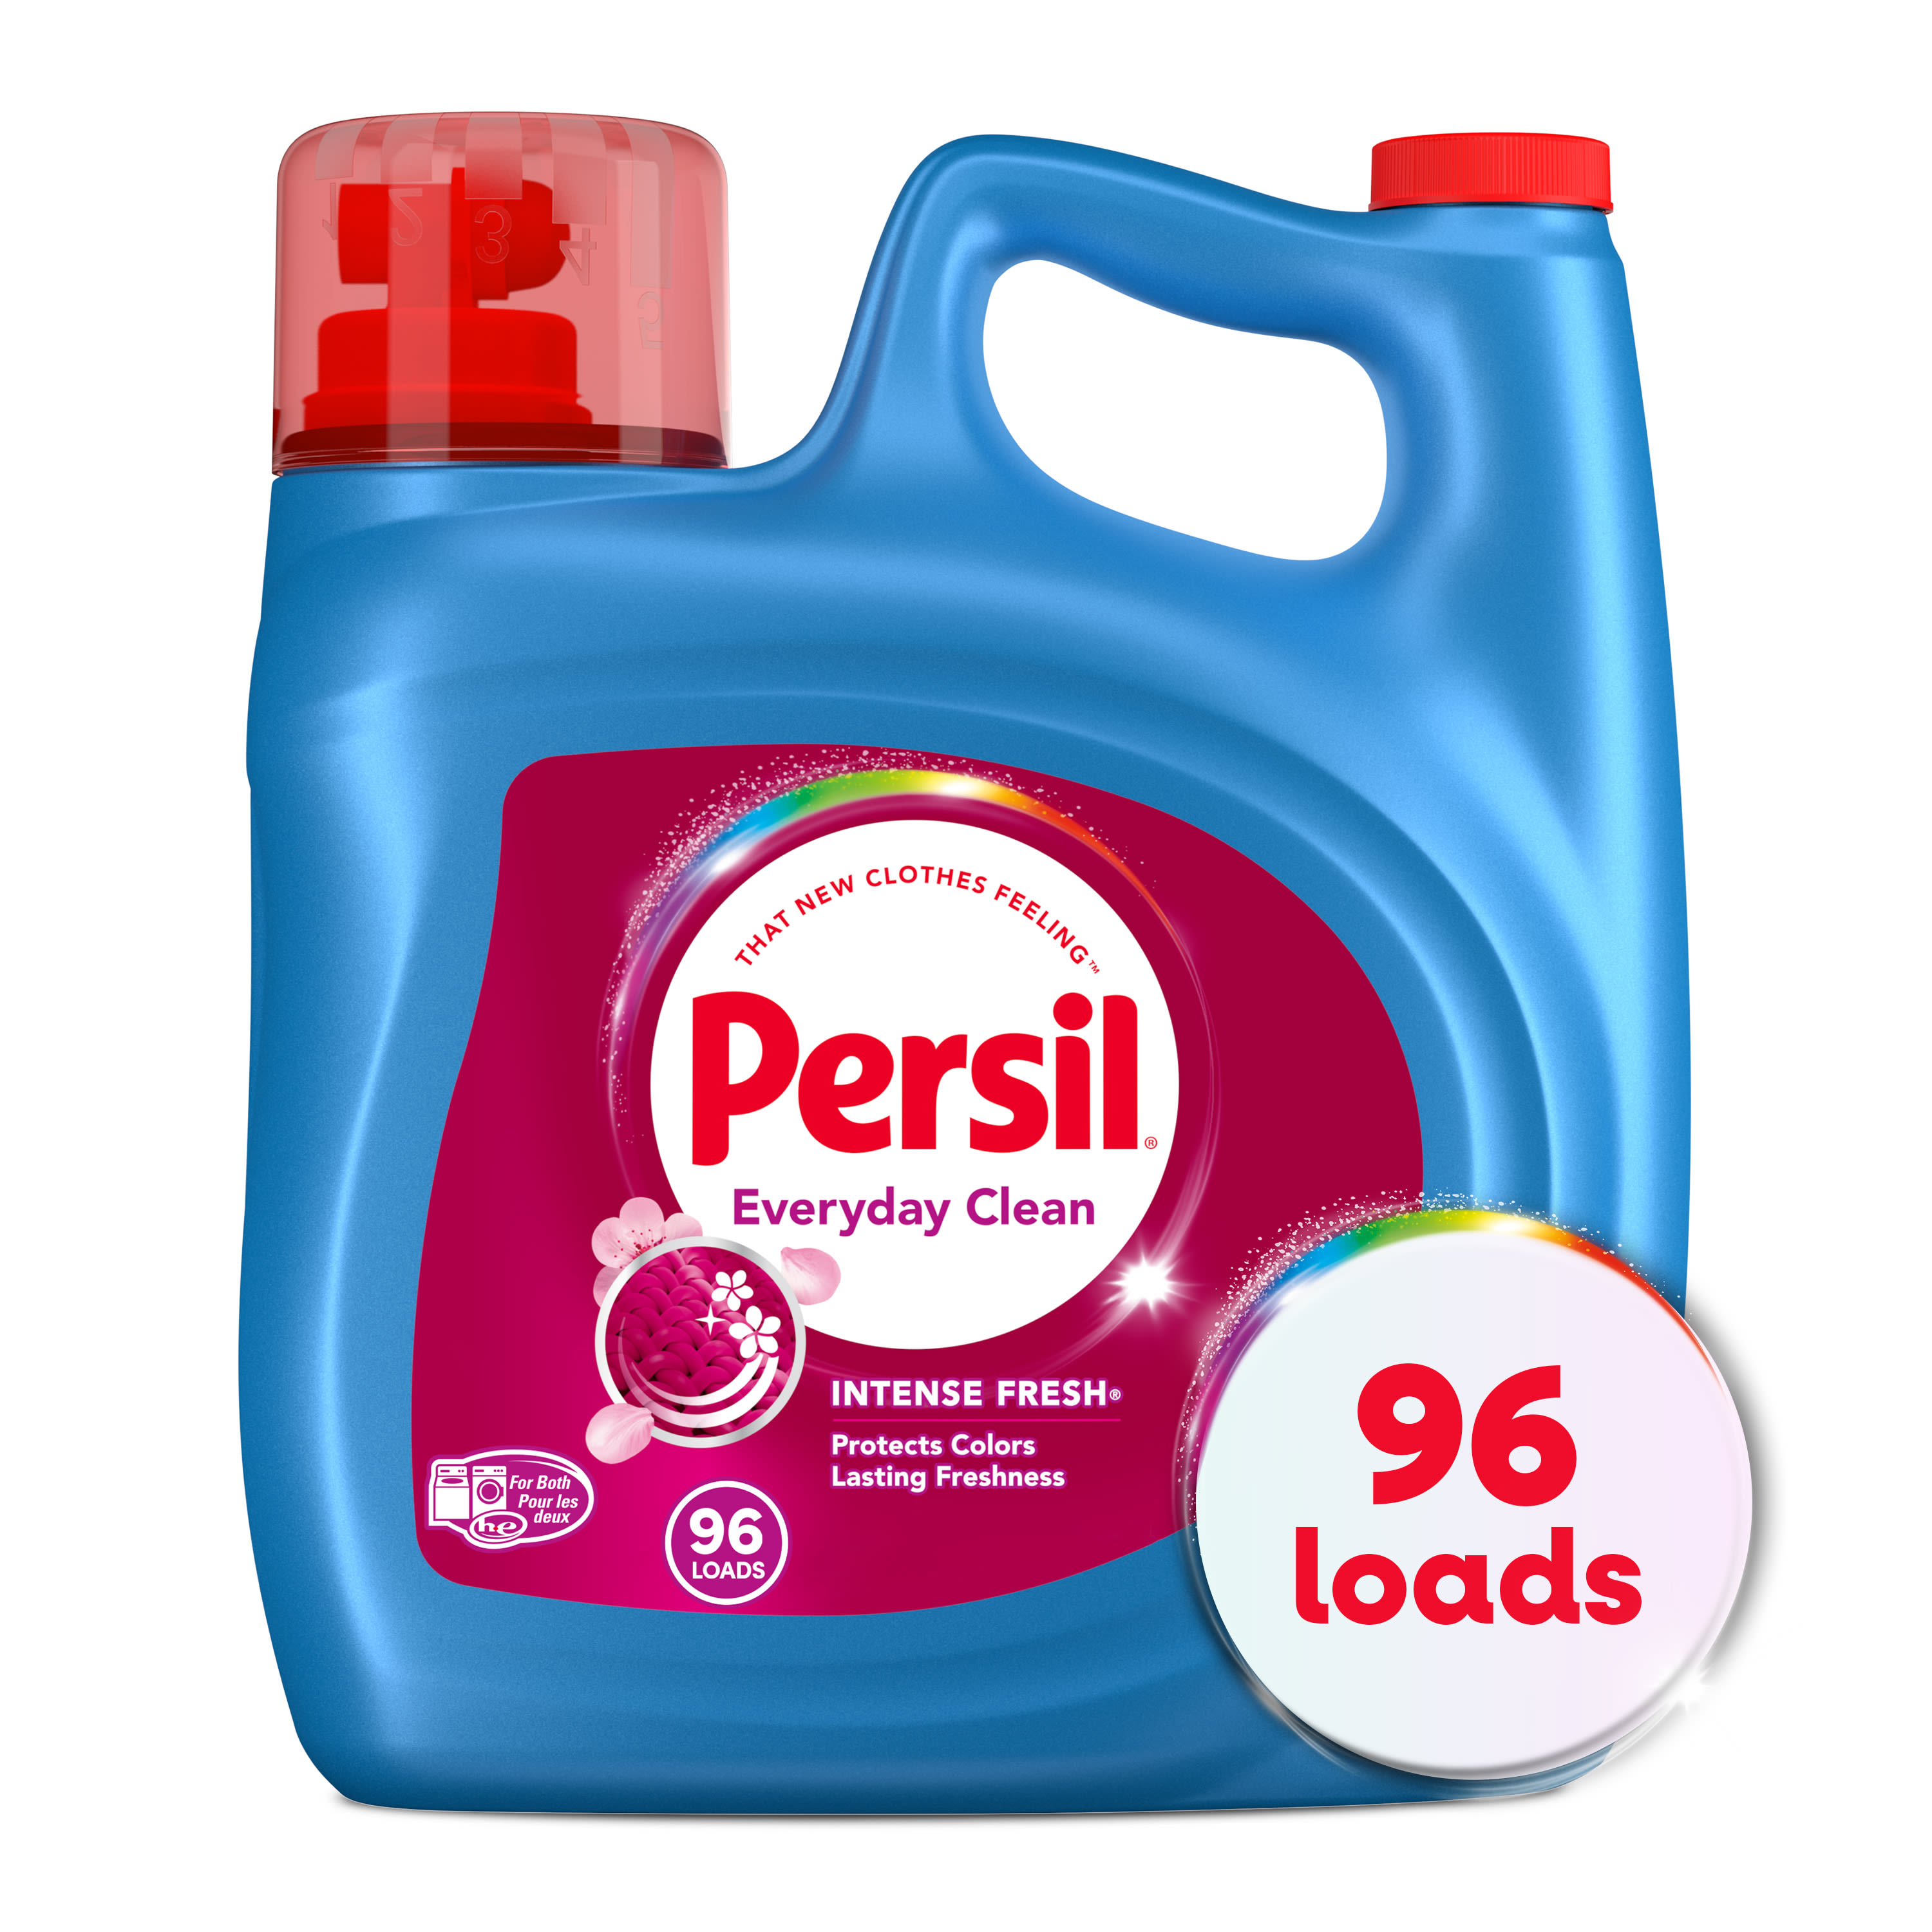 Persil Intense Fresh Everyday Clean Liquid Laundry Detergent, 150 Fluid Ounces, 96 Loads - image 1 of 6